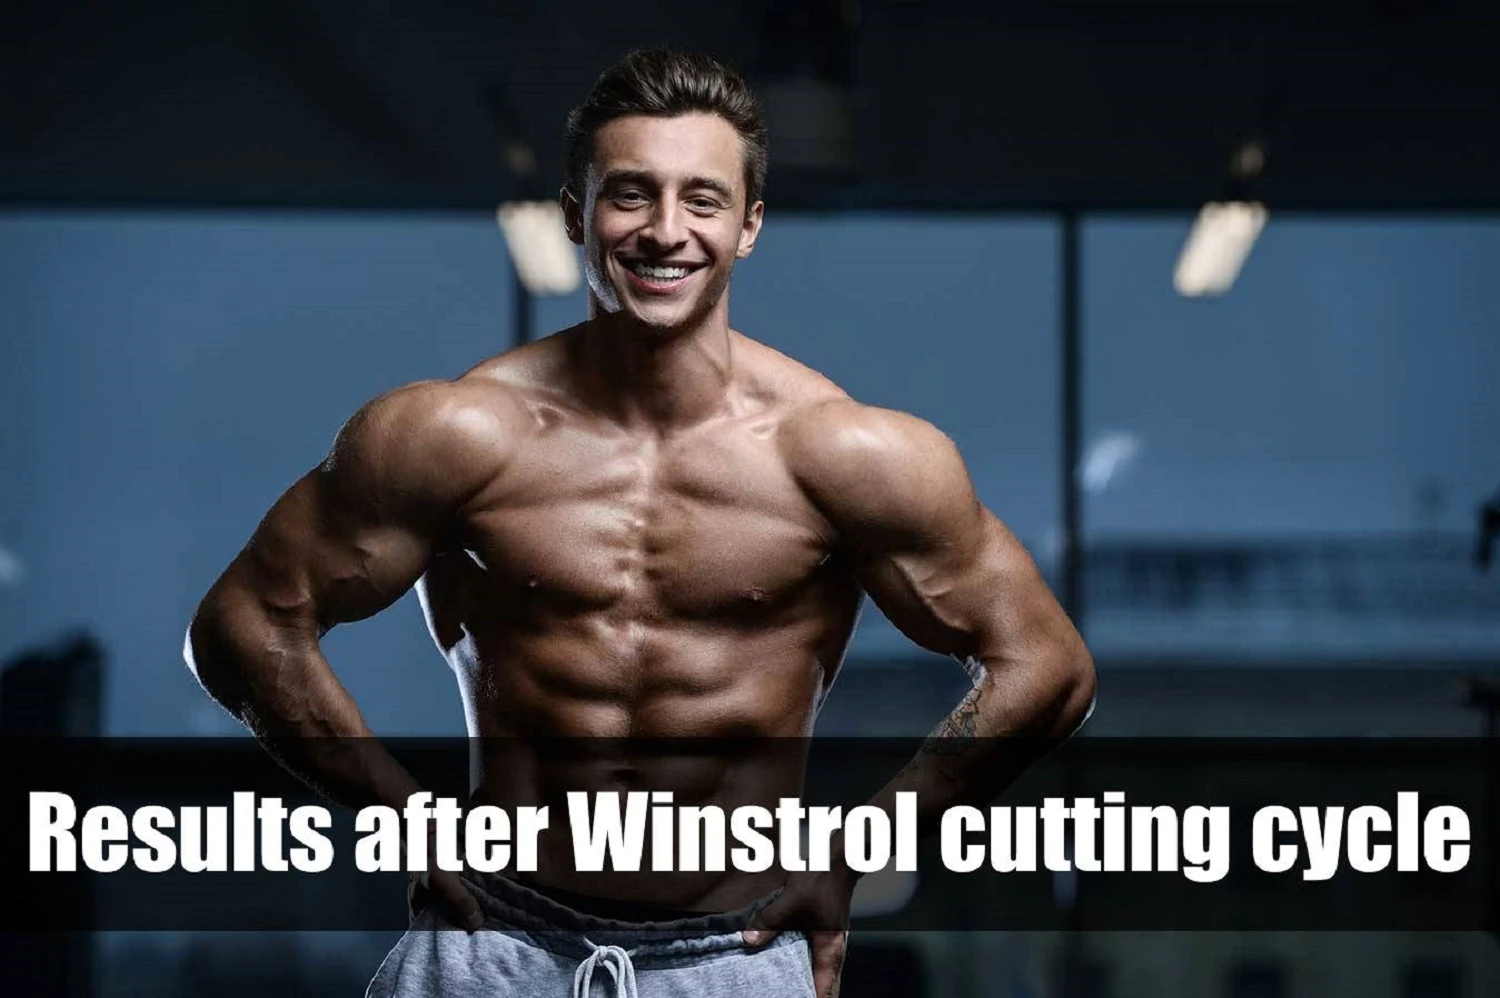 Results after Winstrol